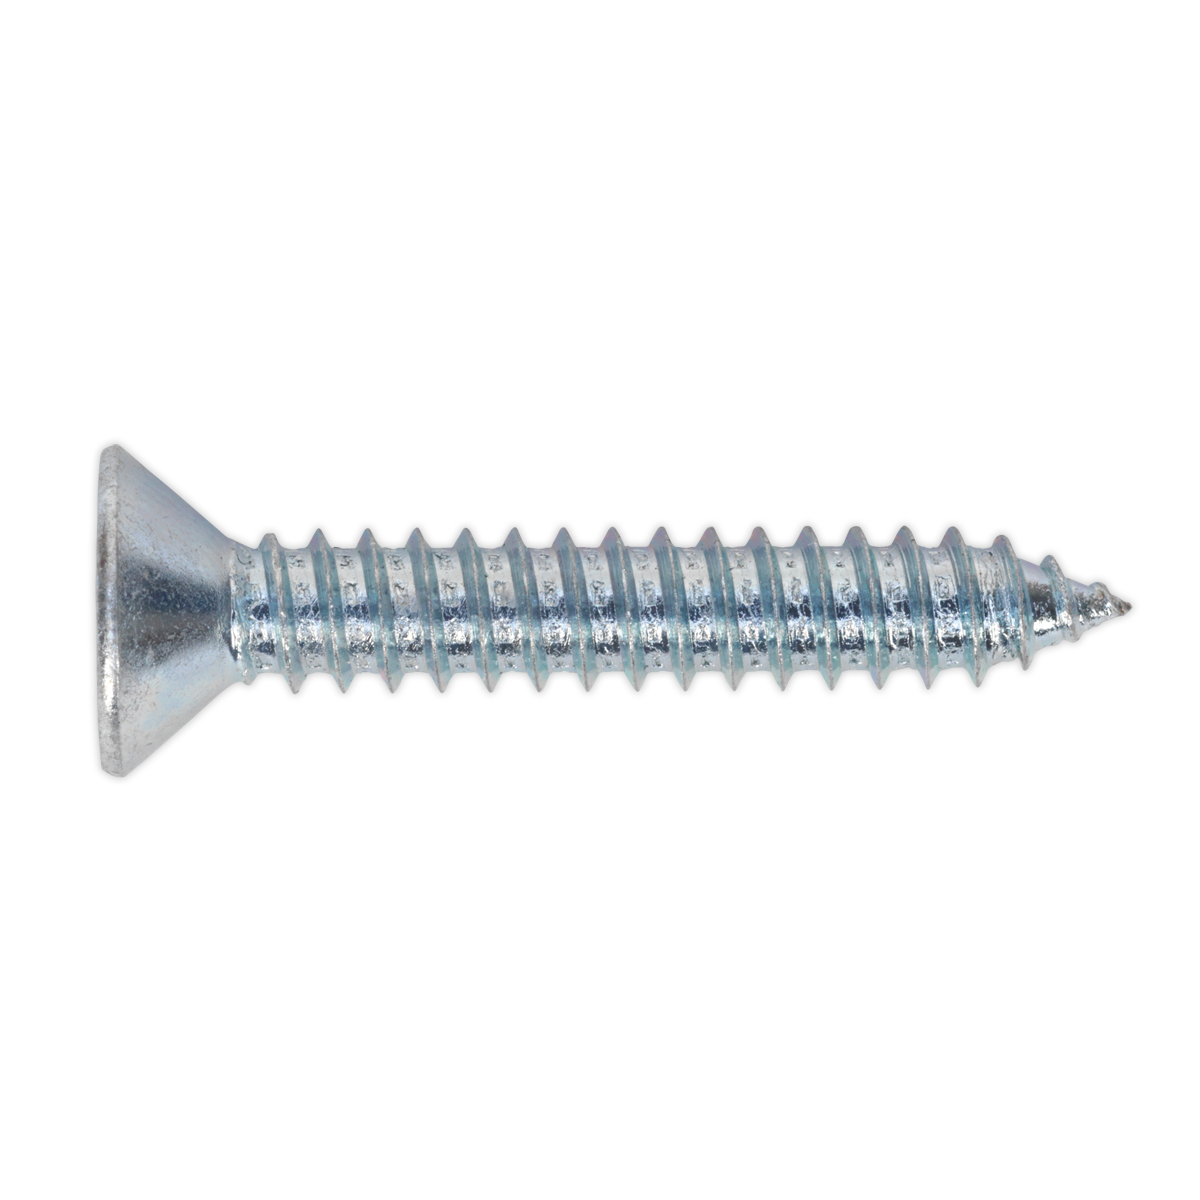 Self Tapping Screw 6.3 x 38mm Countersunk Pozi Pack of 100 - ST6338 - Farming Parts